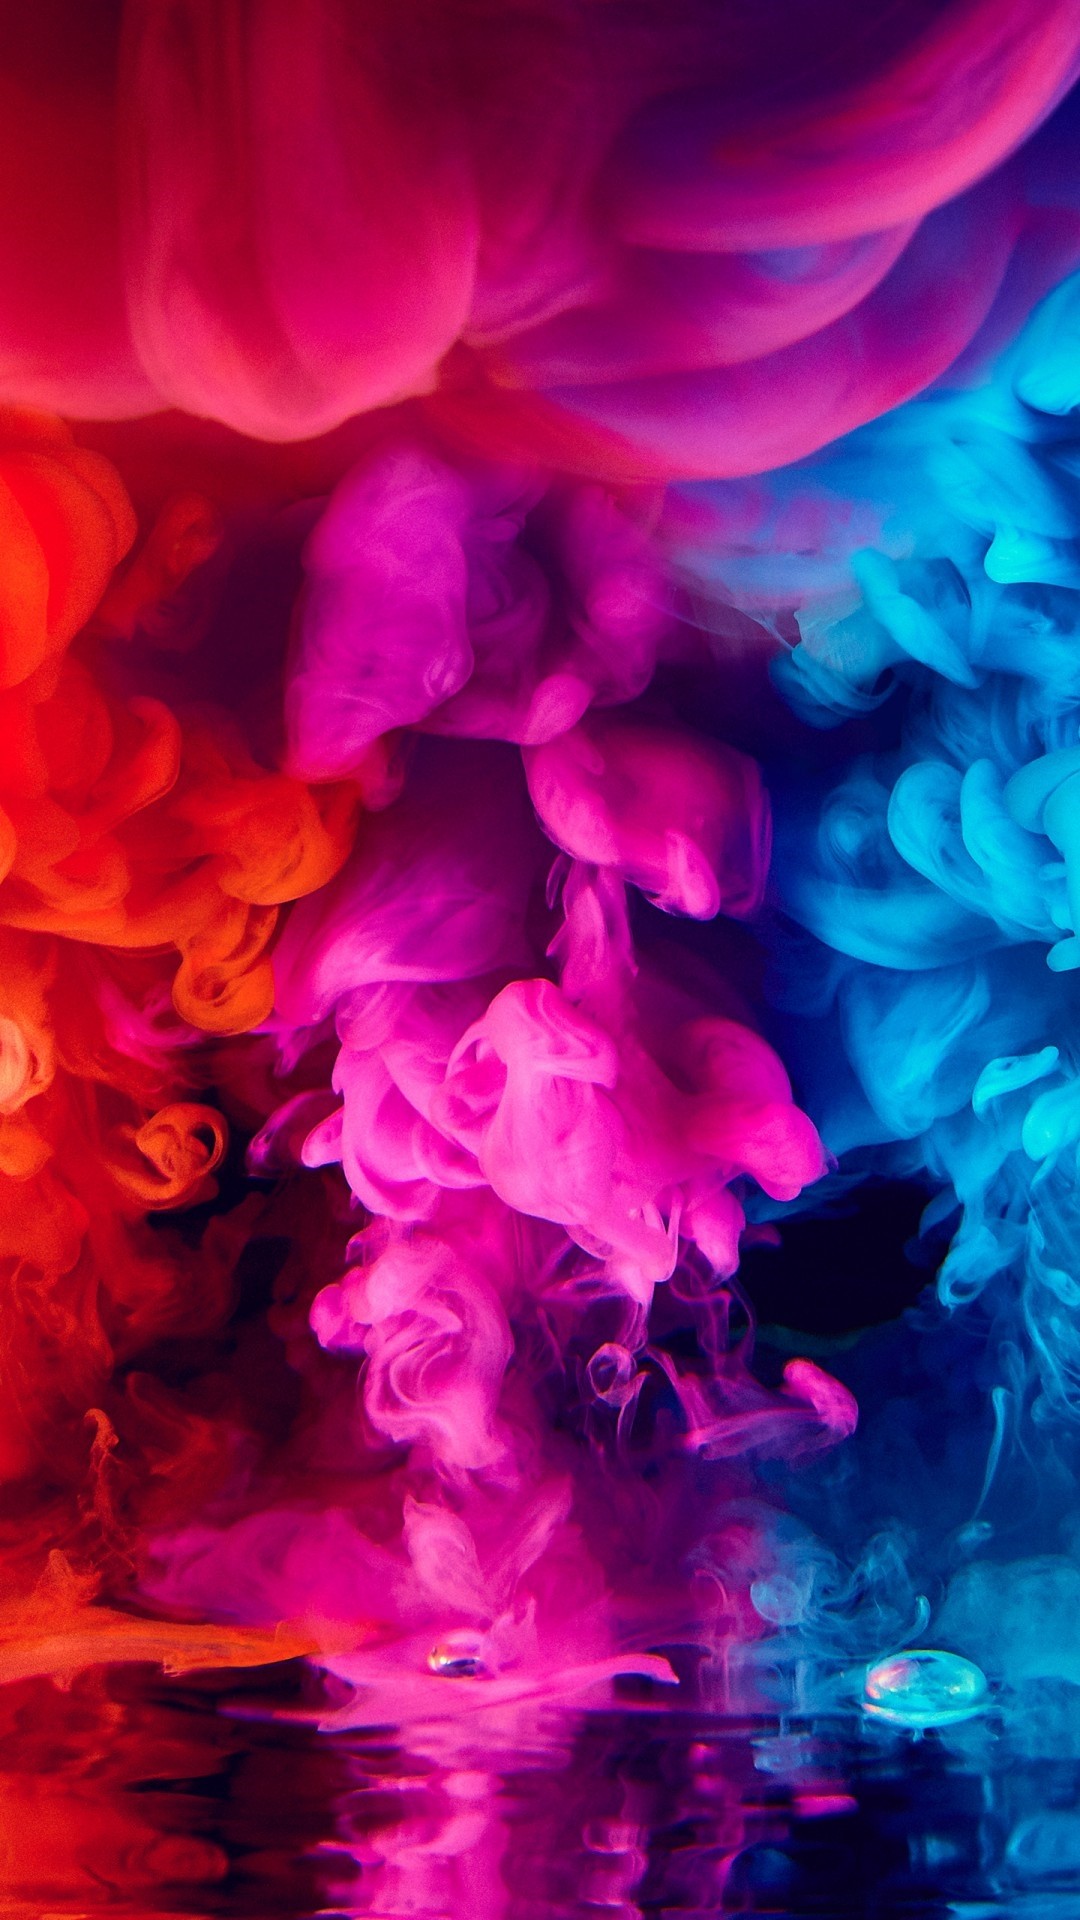 Colorful hd wallpaper for iphone